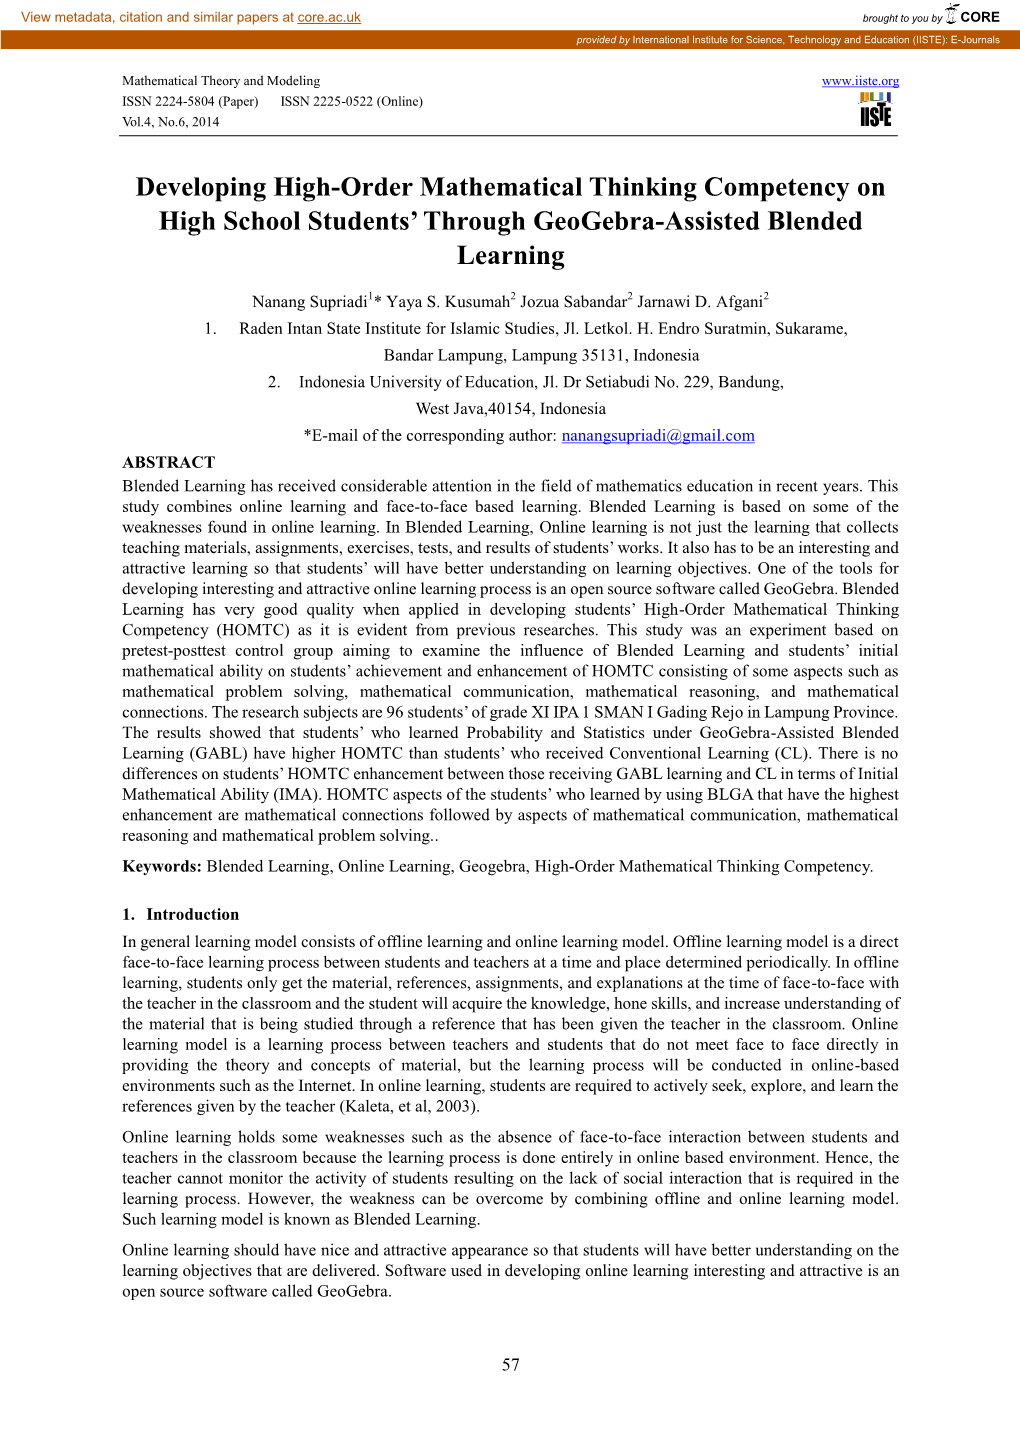 Developing High-Order Mathematical Thinking Competency on High School Students’ Through Geogebra-Assisted Blended Learning